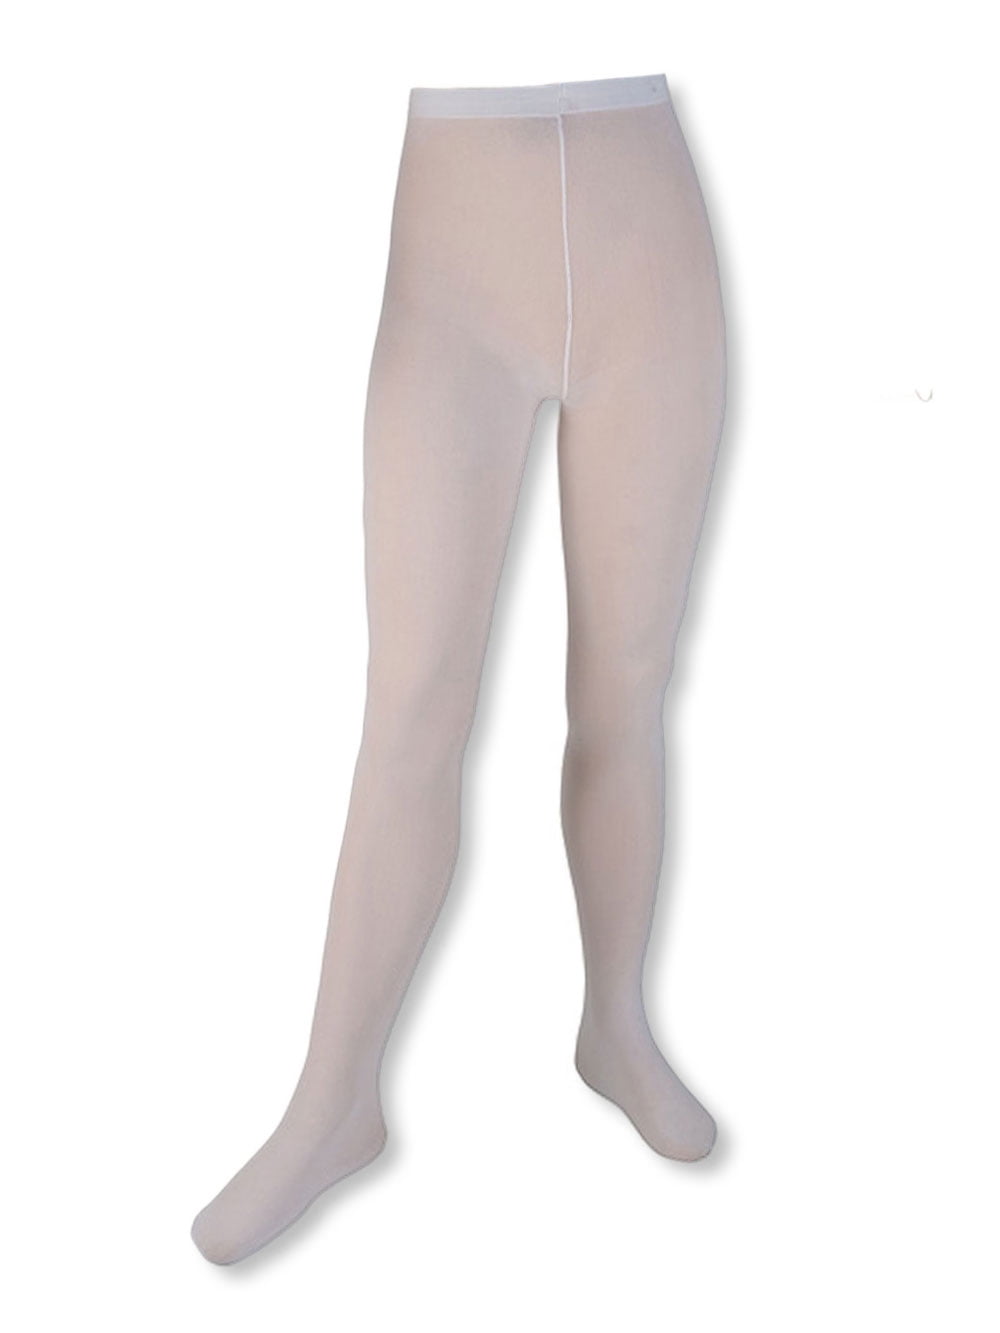 Child Footless Tights T5600C